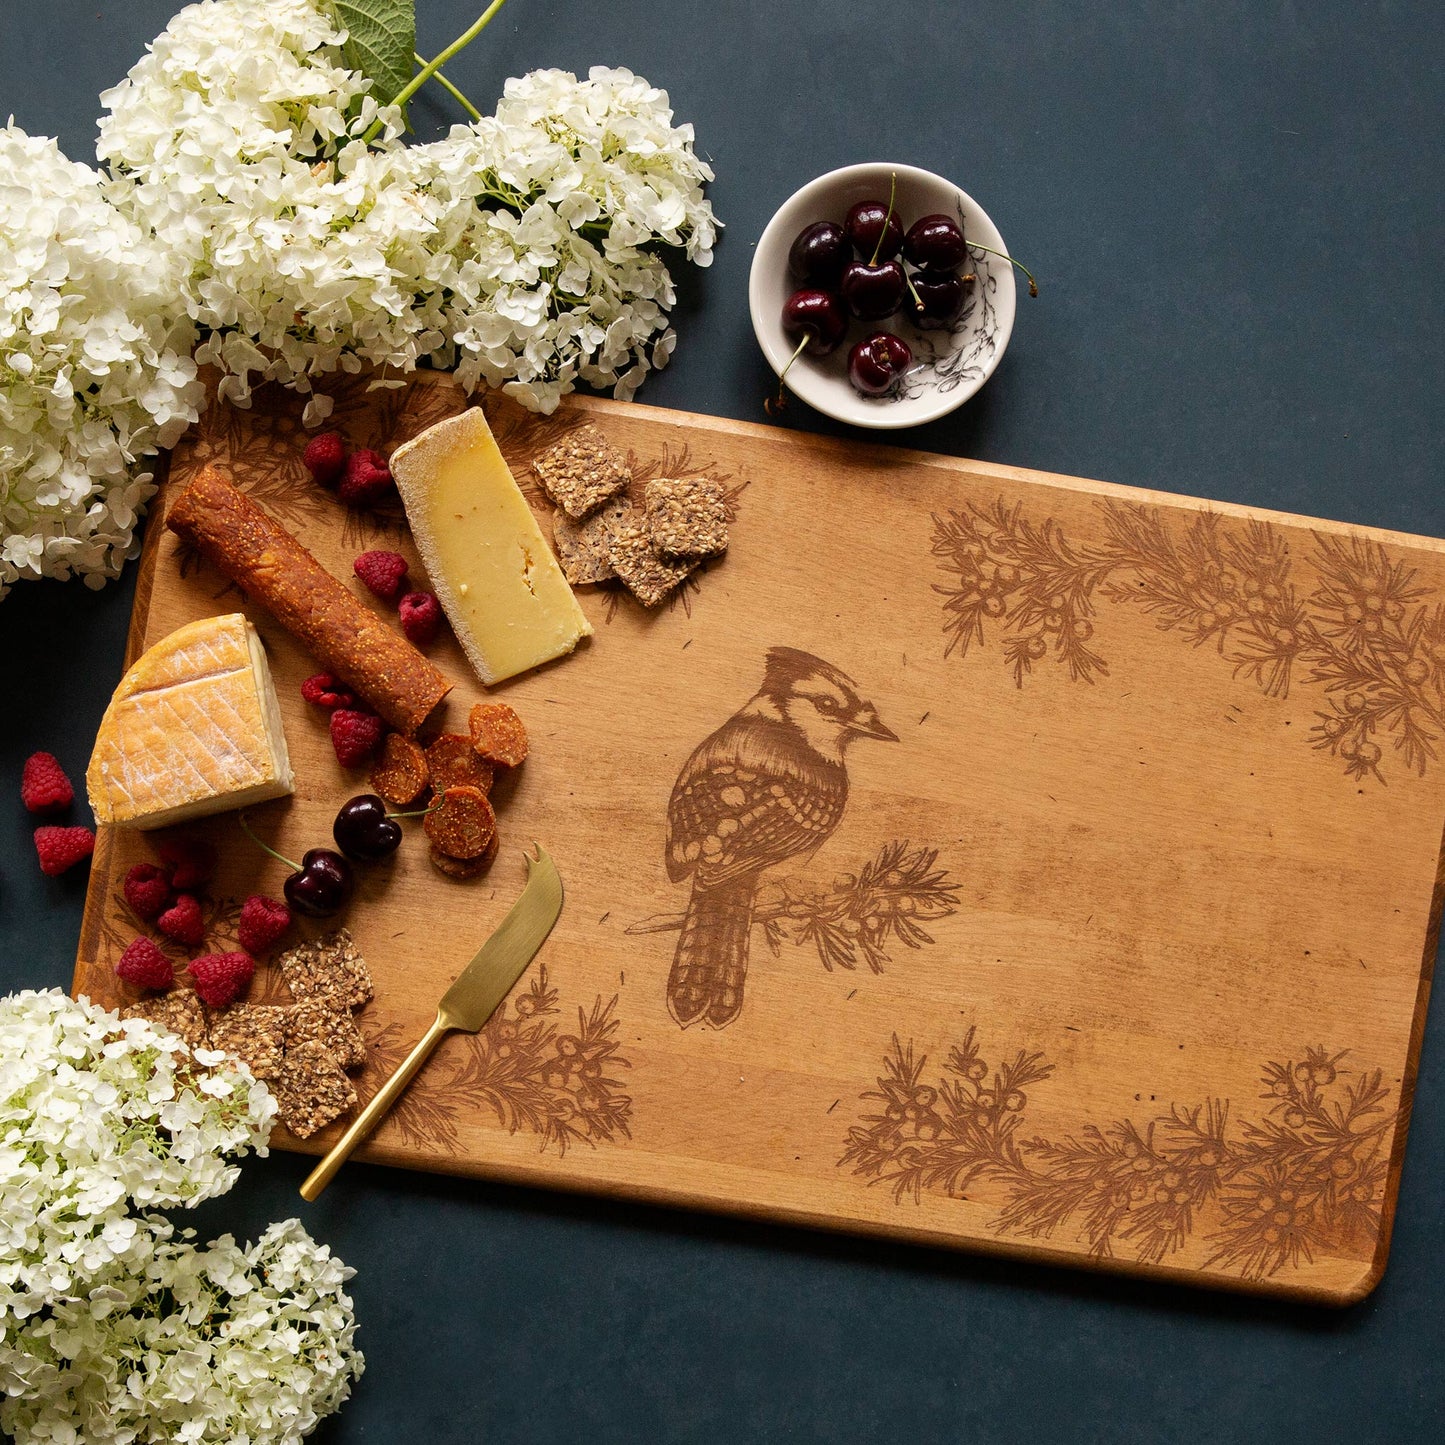 An artisan maple cheese board with an engraved blue jay. The board has cheese, crackers and charcuterie on it.